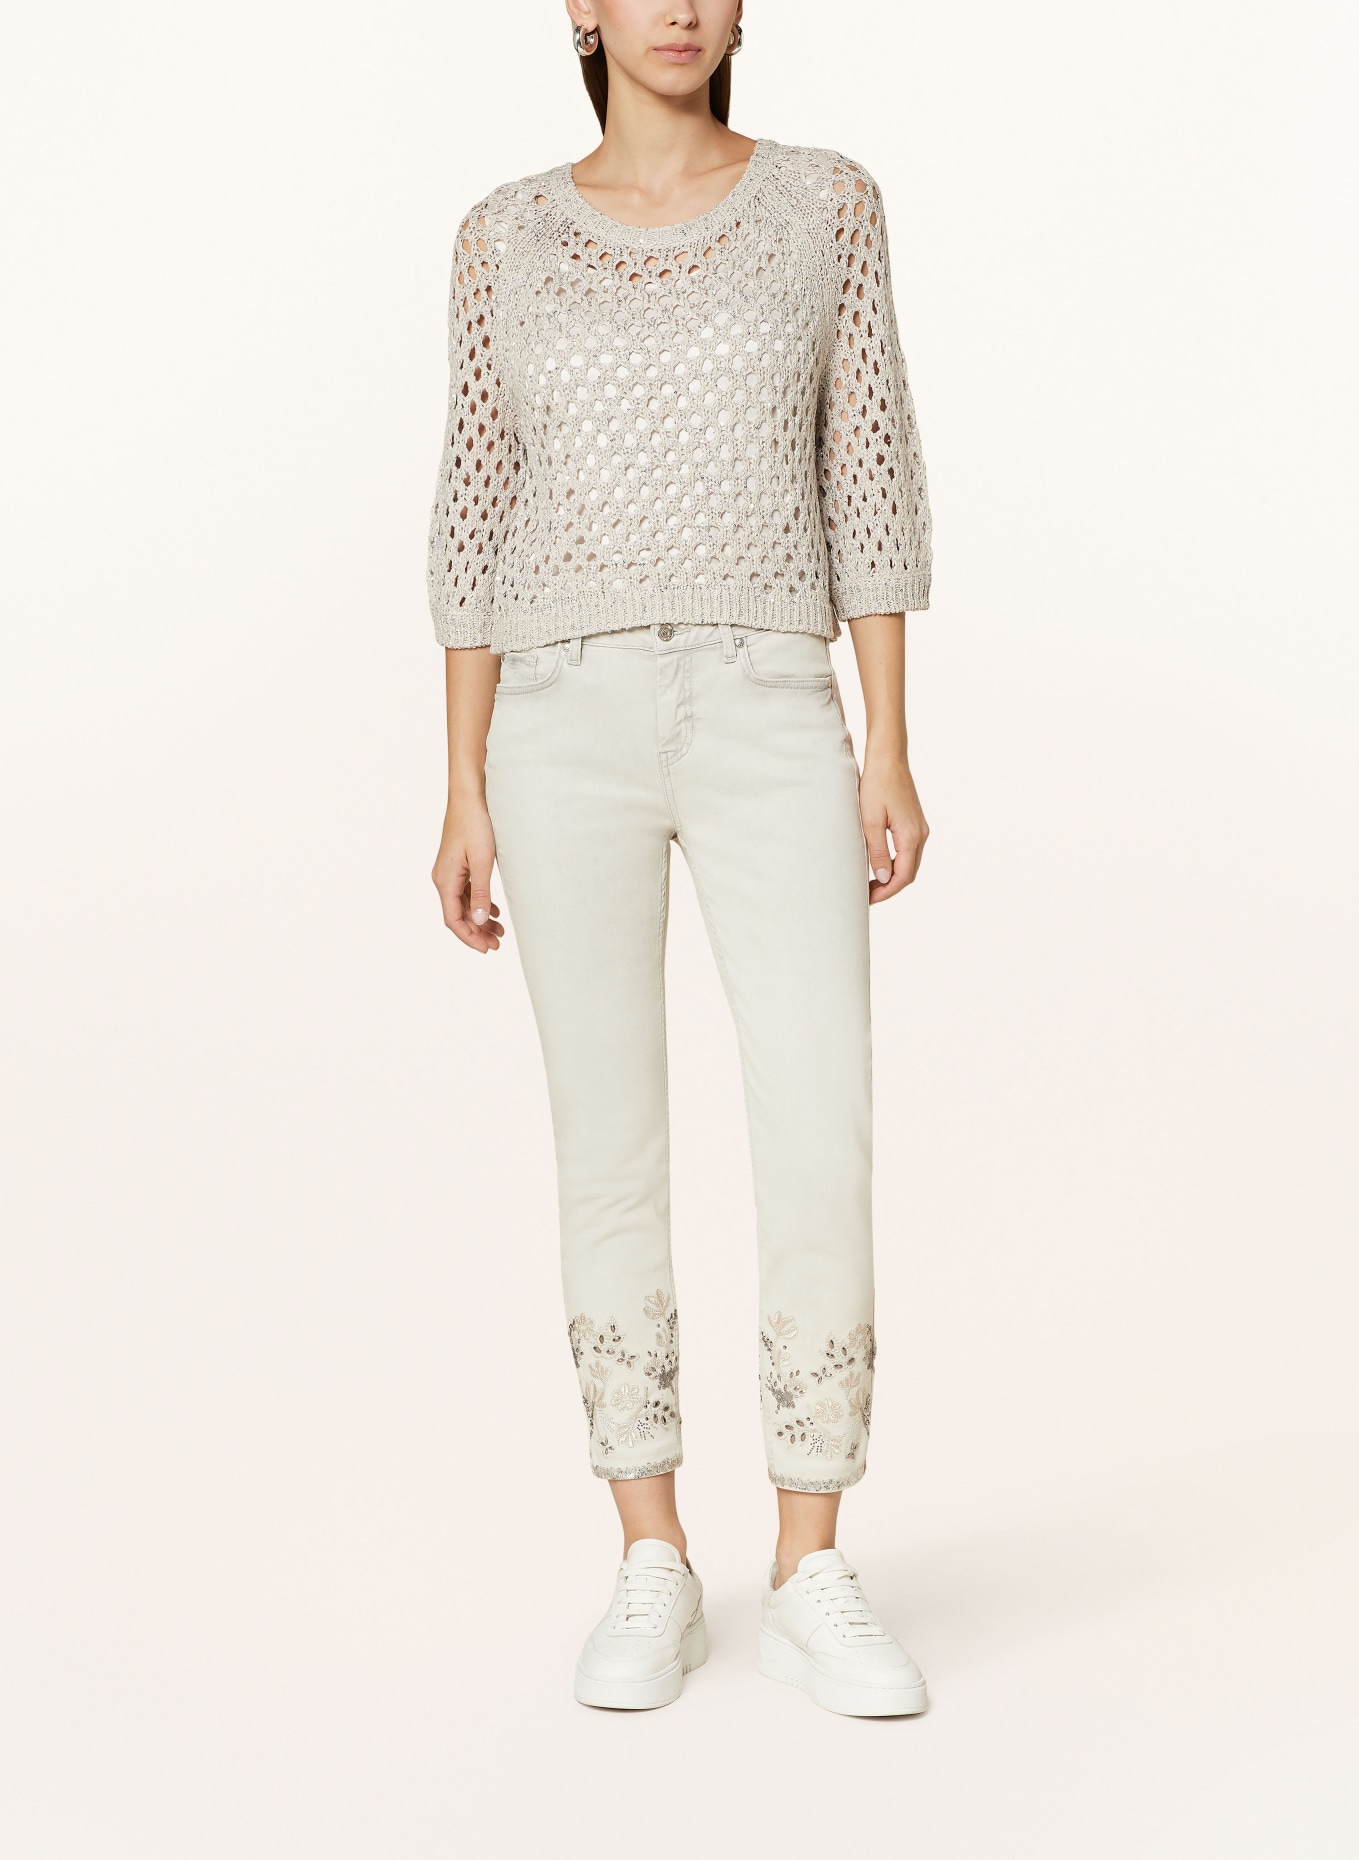 monari Knit shirt with 3/4 sleeves and sequins, Color: 540 light sand (Image 2)